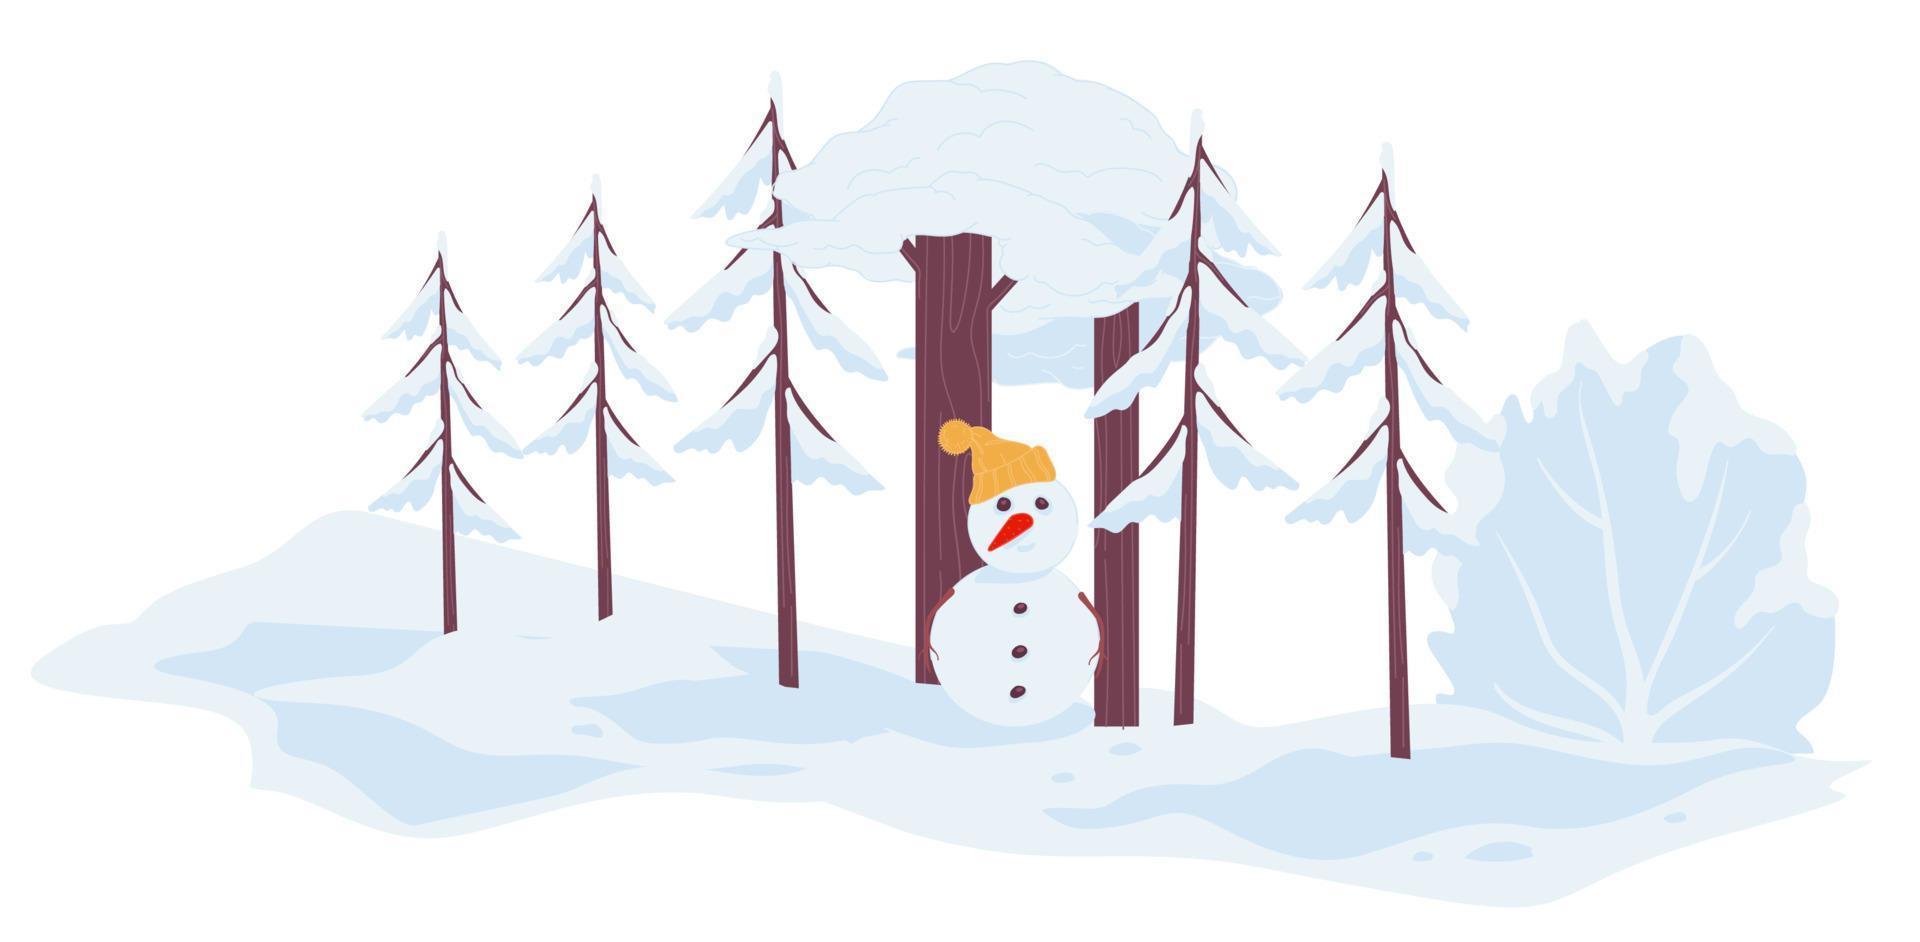 Snowy landscape with winter scape and snowman vector